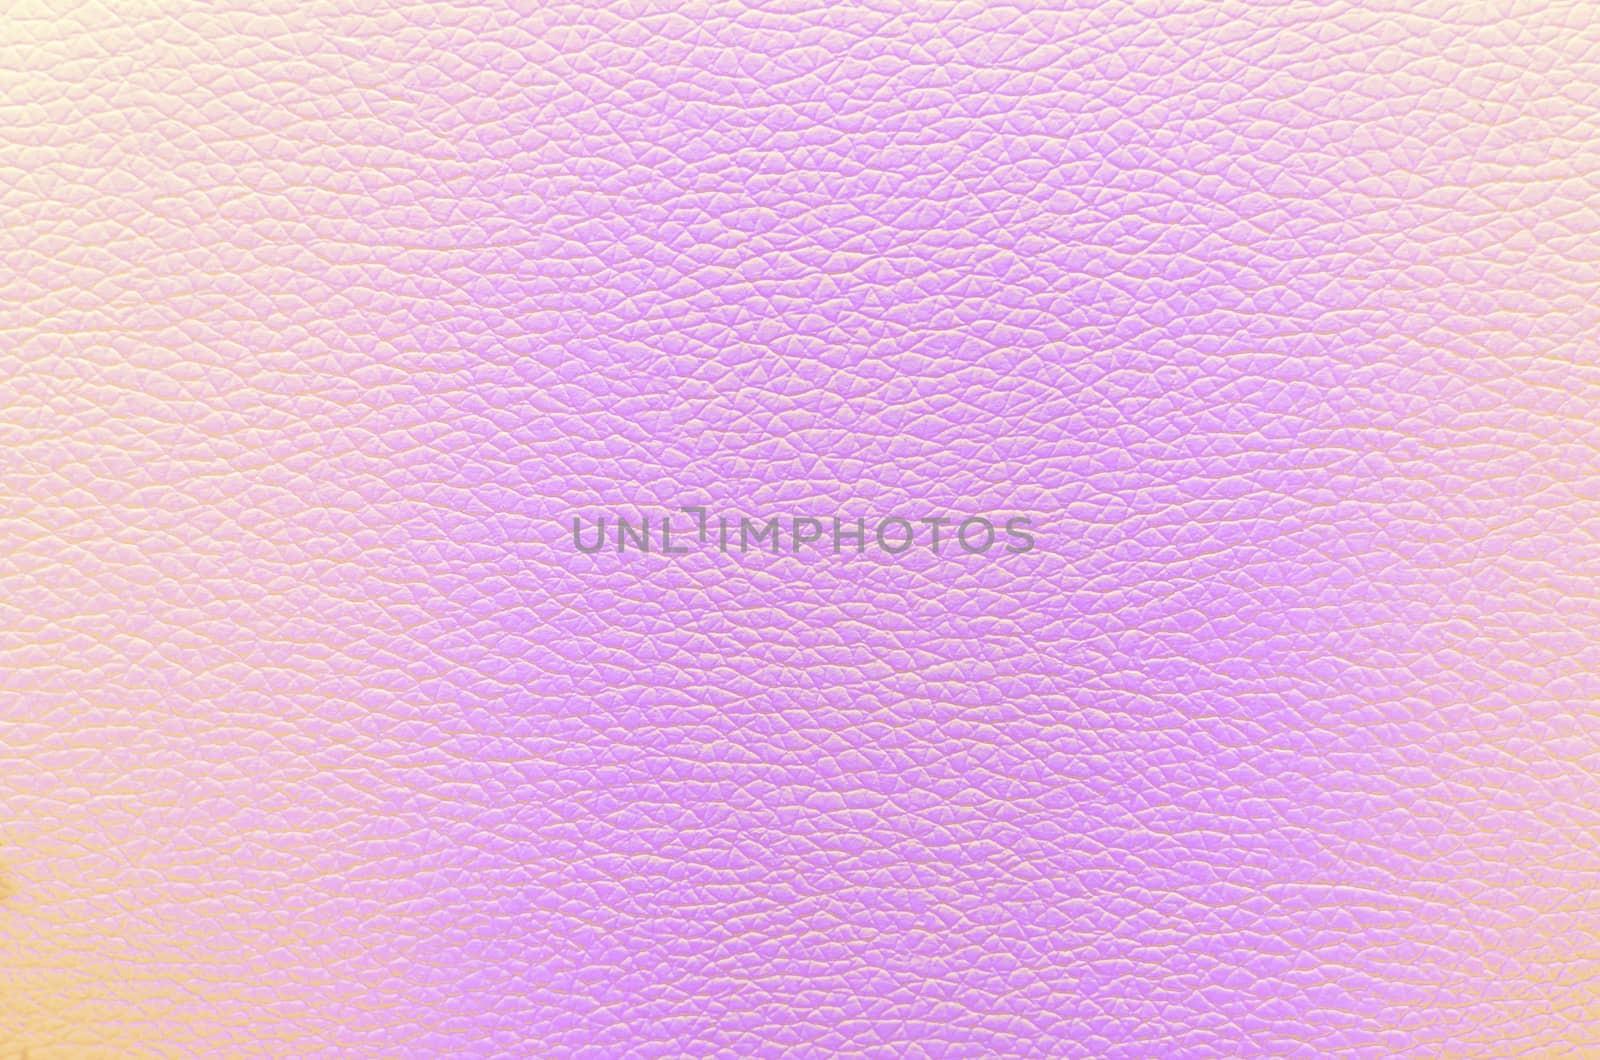 Close-up of a leather pink texture used for background